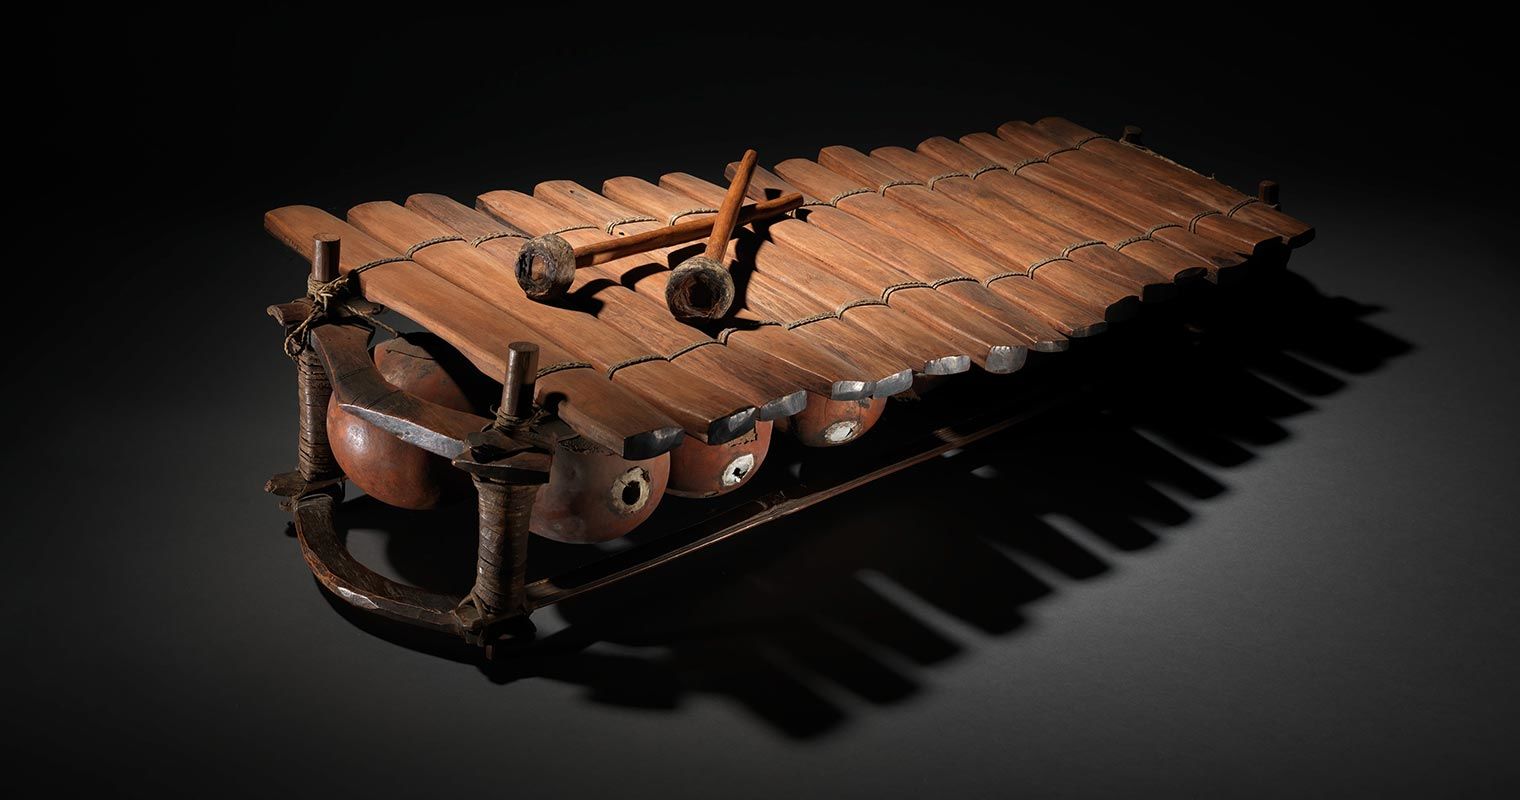 A xylophone like object with 15 gourd-resonated bars of wood.